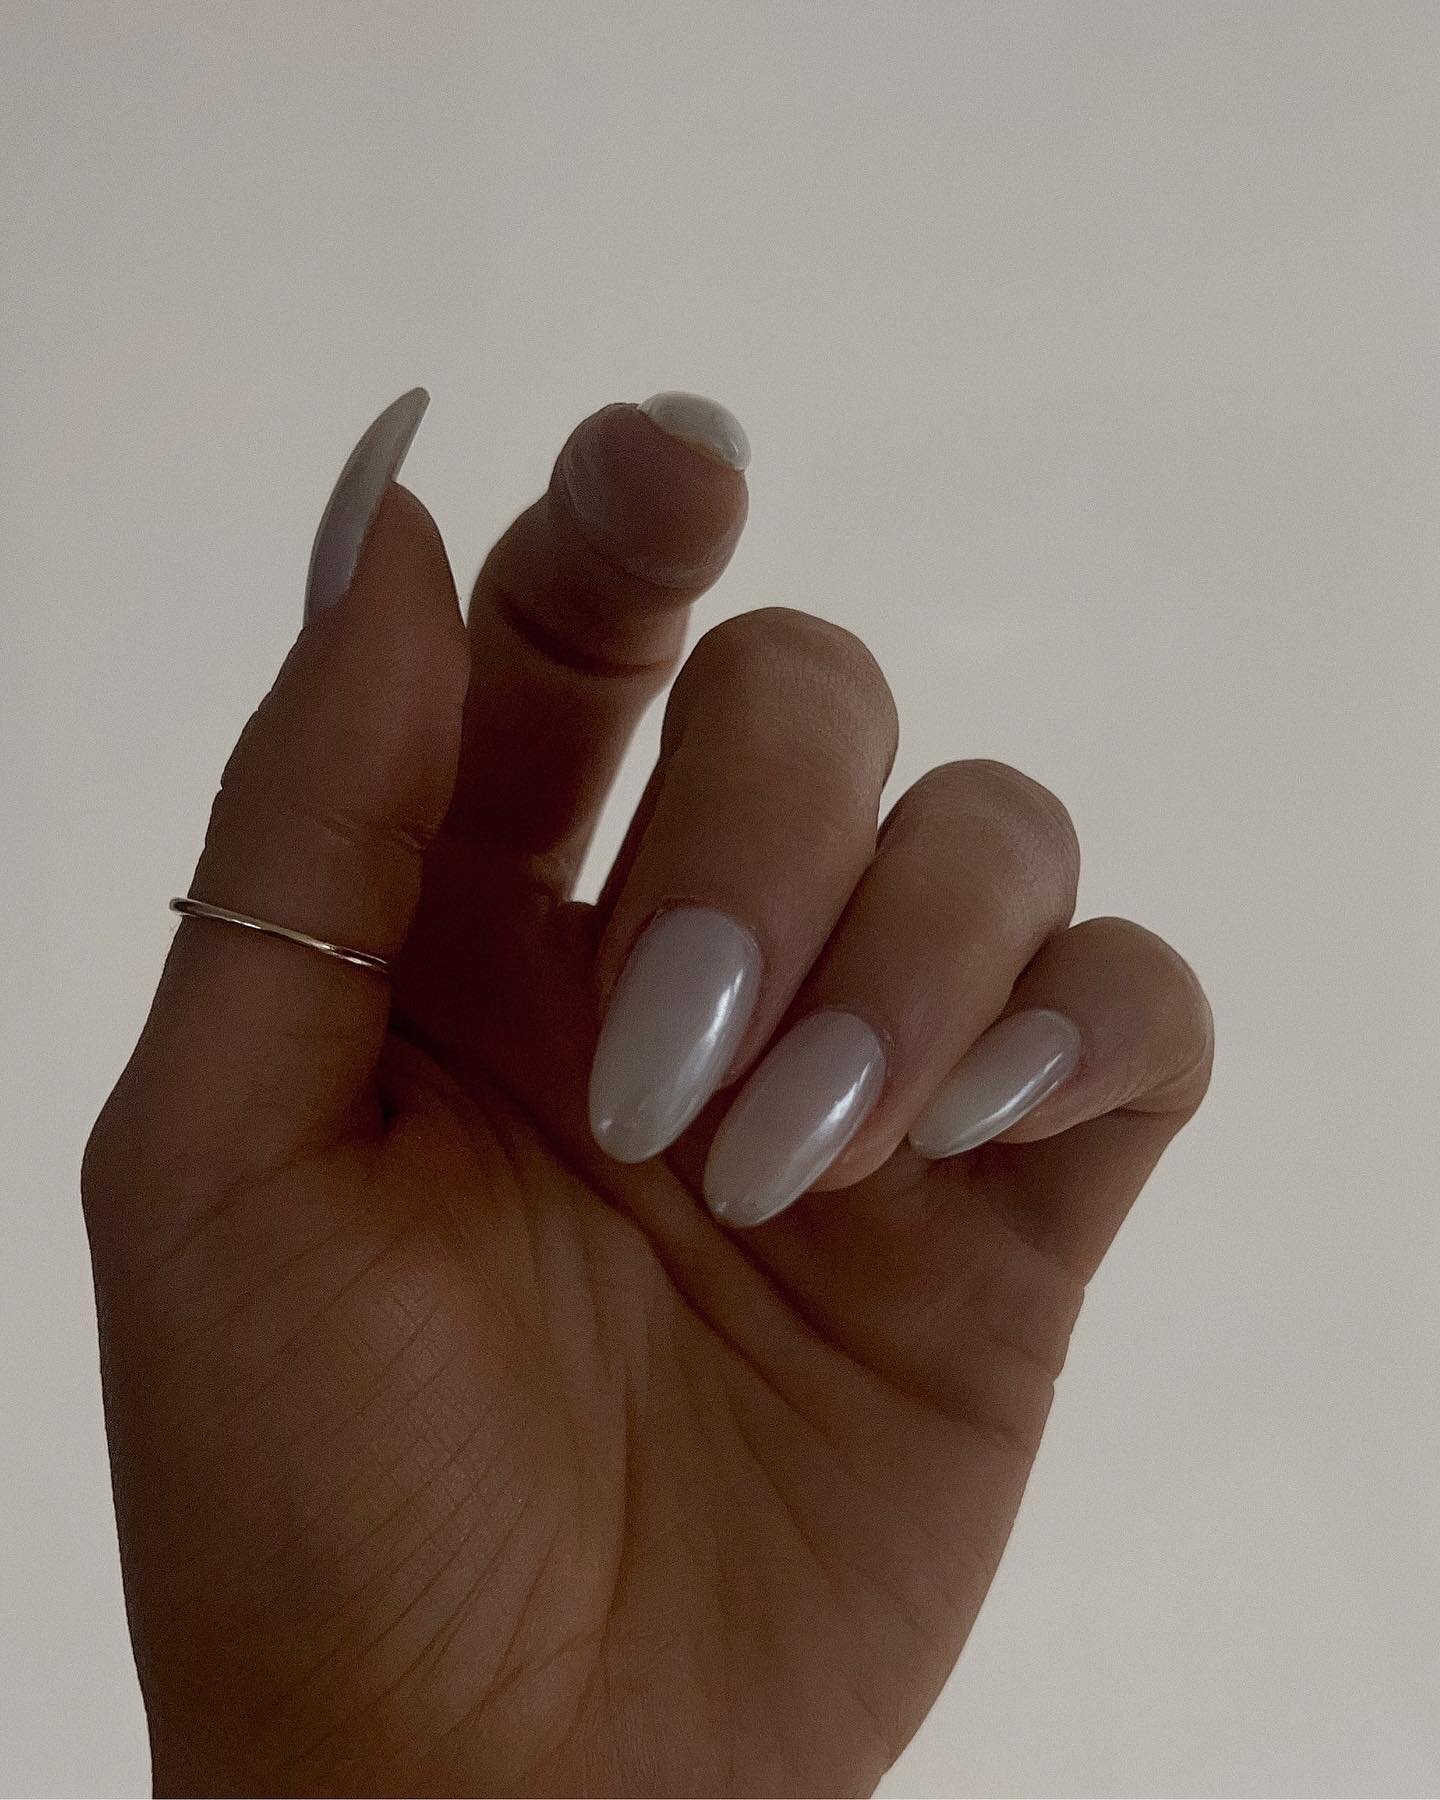 Time for Ibiza Nails!  Loved these pearly whites, but it&rsquo;s time for something more fun!

Should I do two, three, or four? Or send me other ideas!! 🤍

#nailinspo